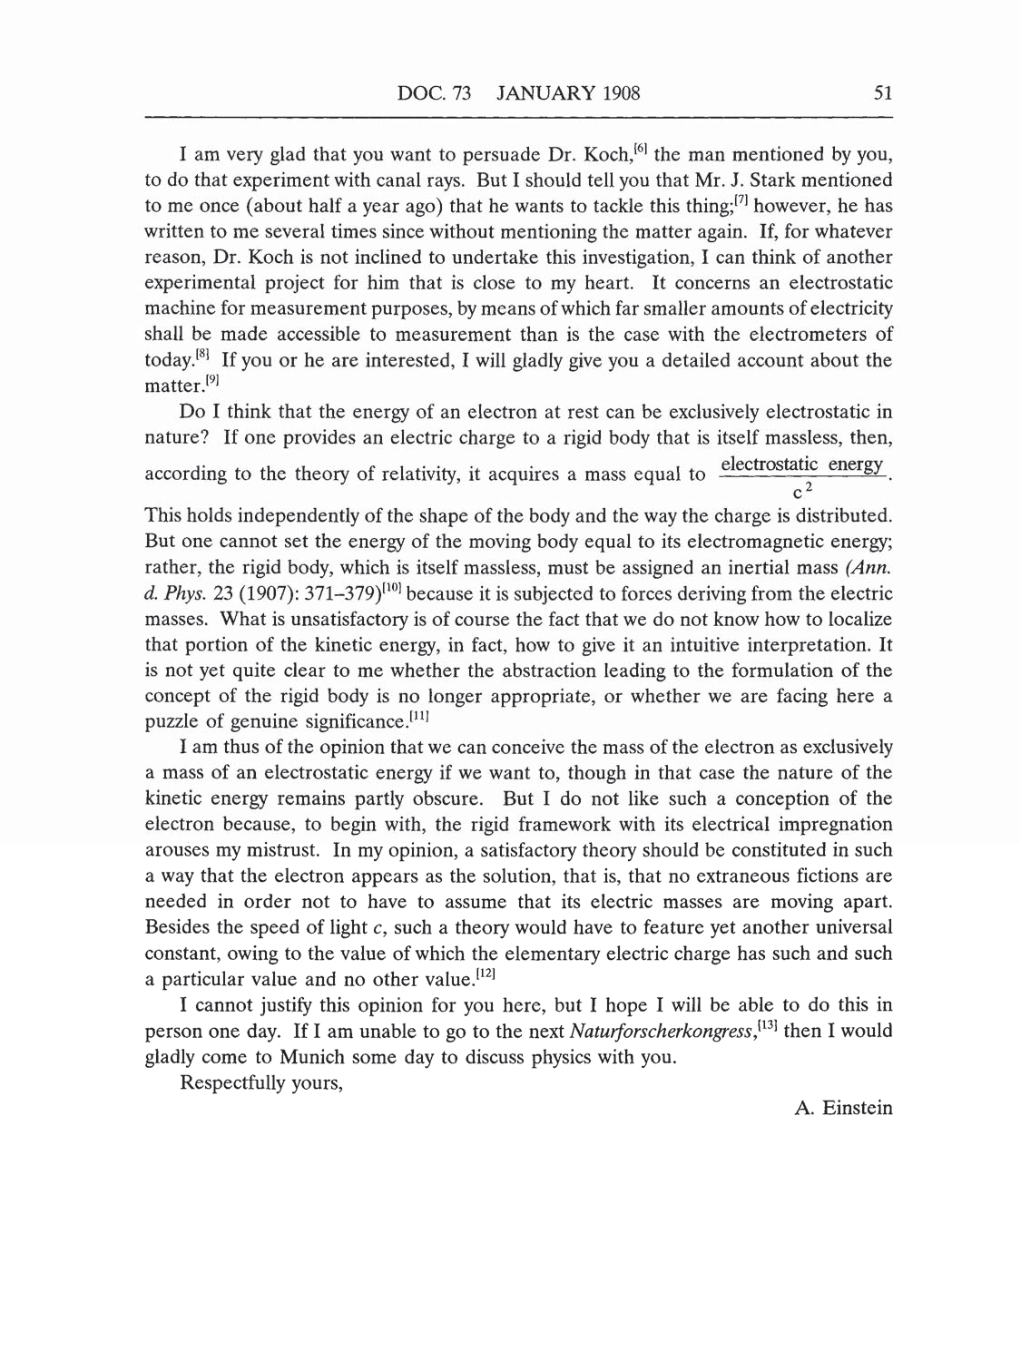 Volume 5: The Swiss Years: Correspondence, 1902-1914 (English translation supplement) page 51